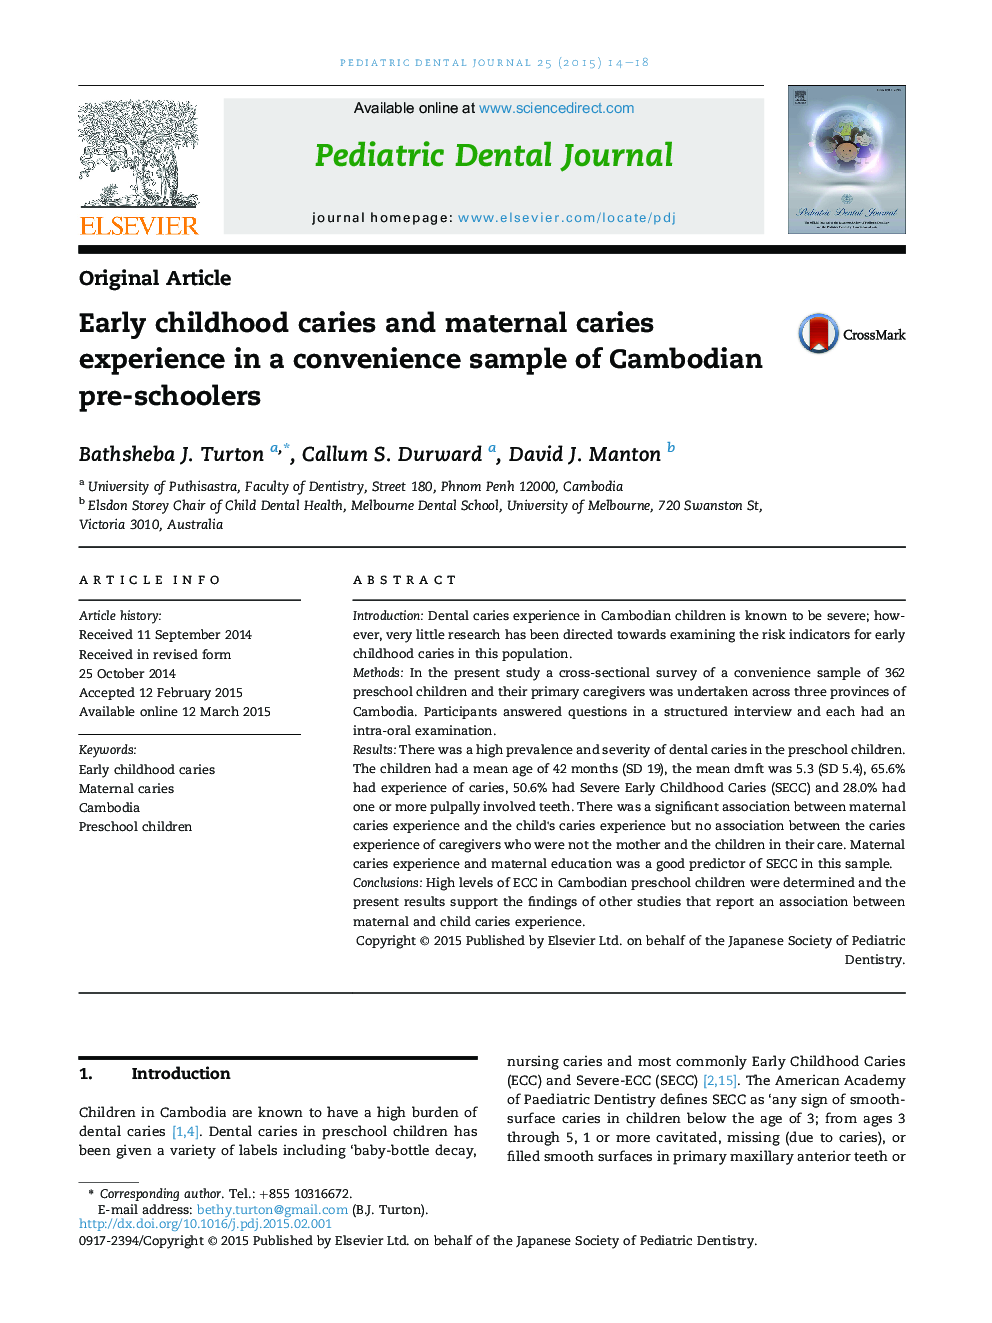 Early childhood caries and maternal caries experience in a convenience sample of Cambodian pre-schoolers